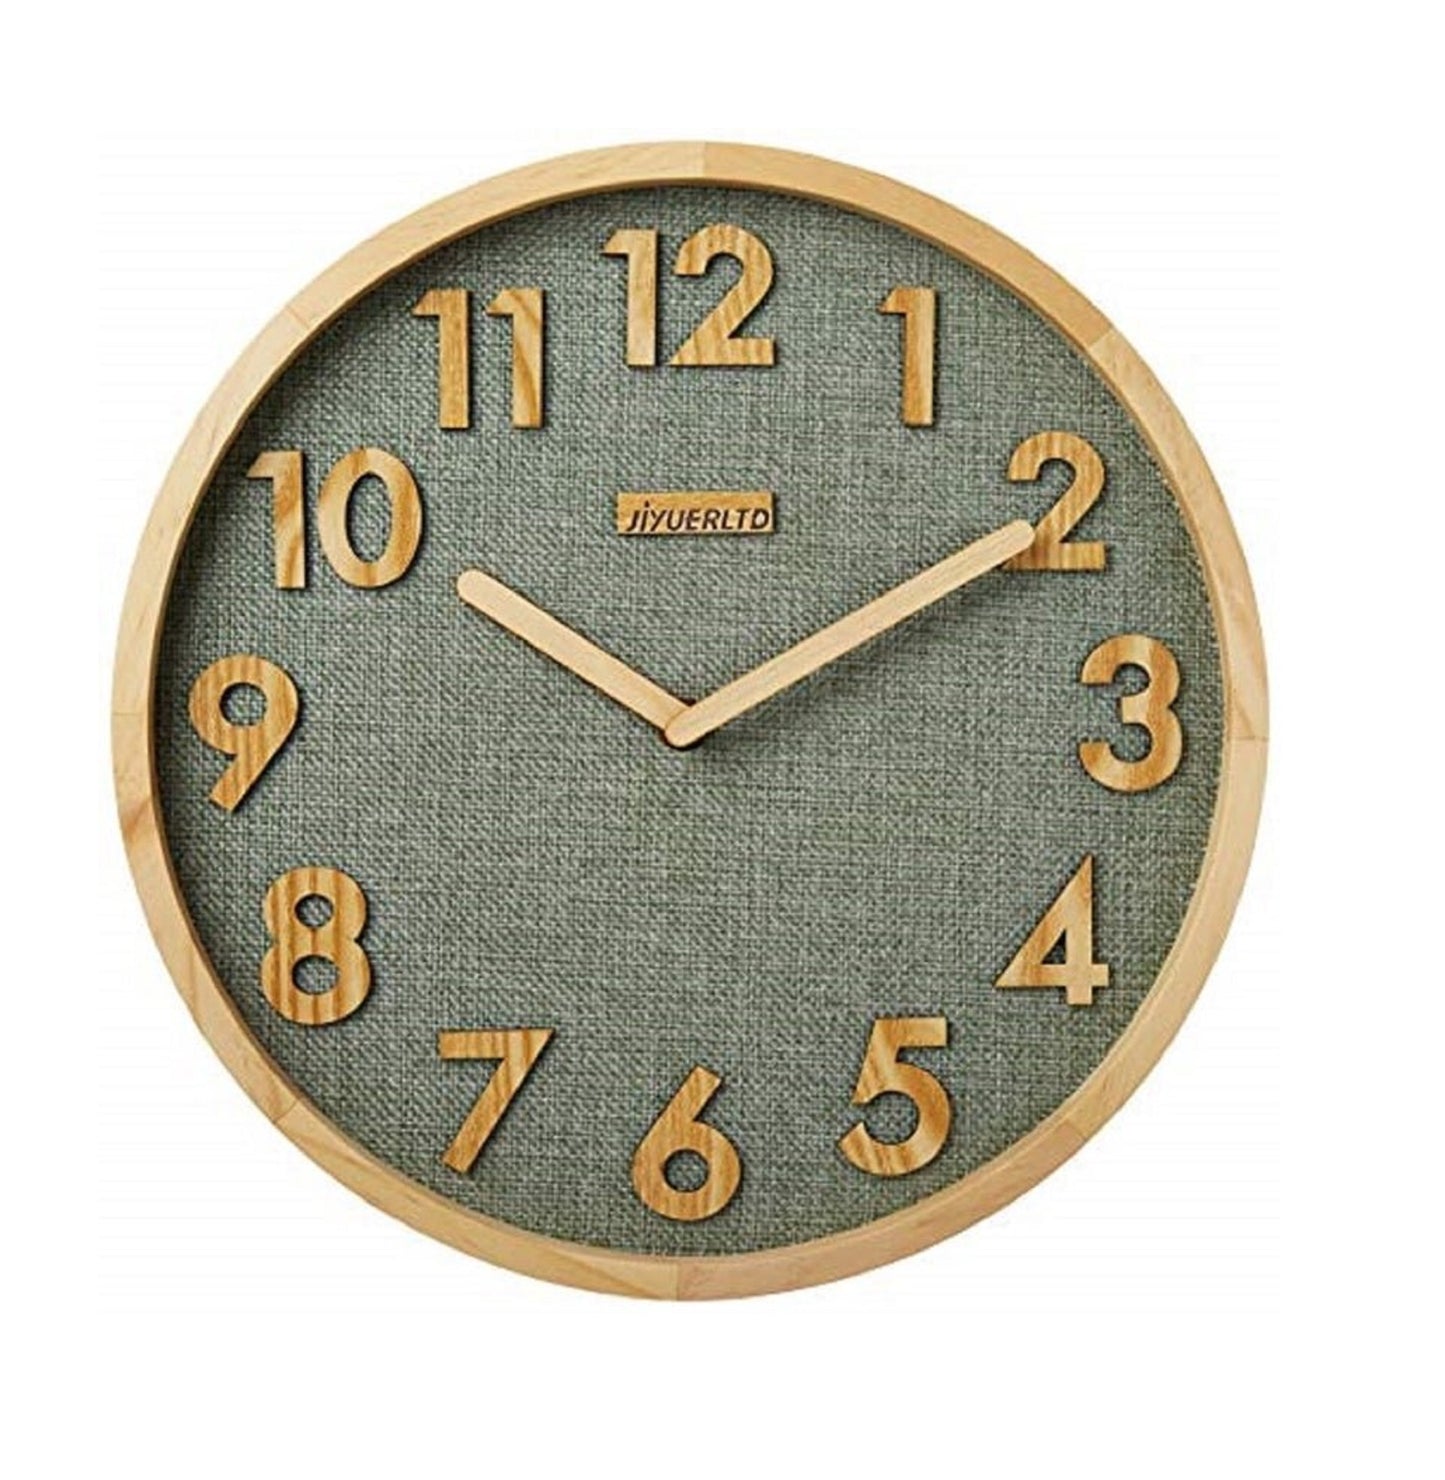 JIYUERLTD Silent Wall Clock 12 In Kitchen Clock with 3D Wood Numbers, Non-Ticking Quartz Movement, Linen Face and Wood Frame for Home, Office, Classroom(Green)